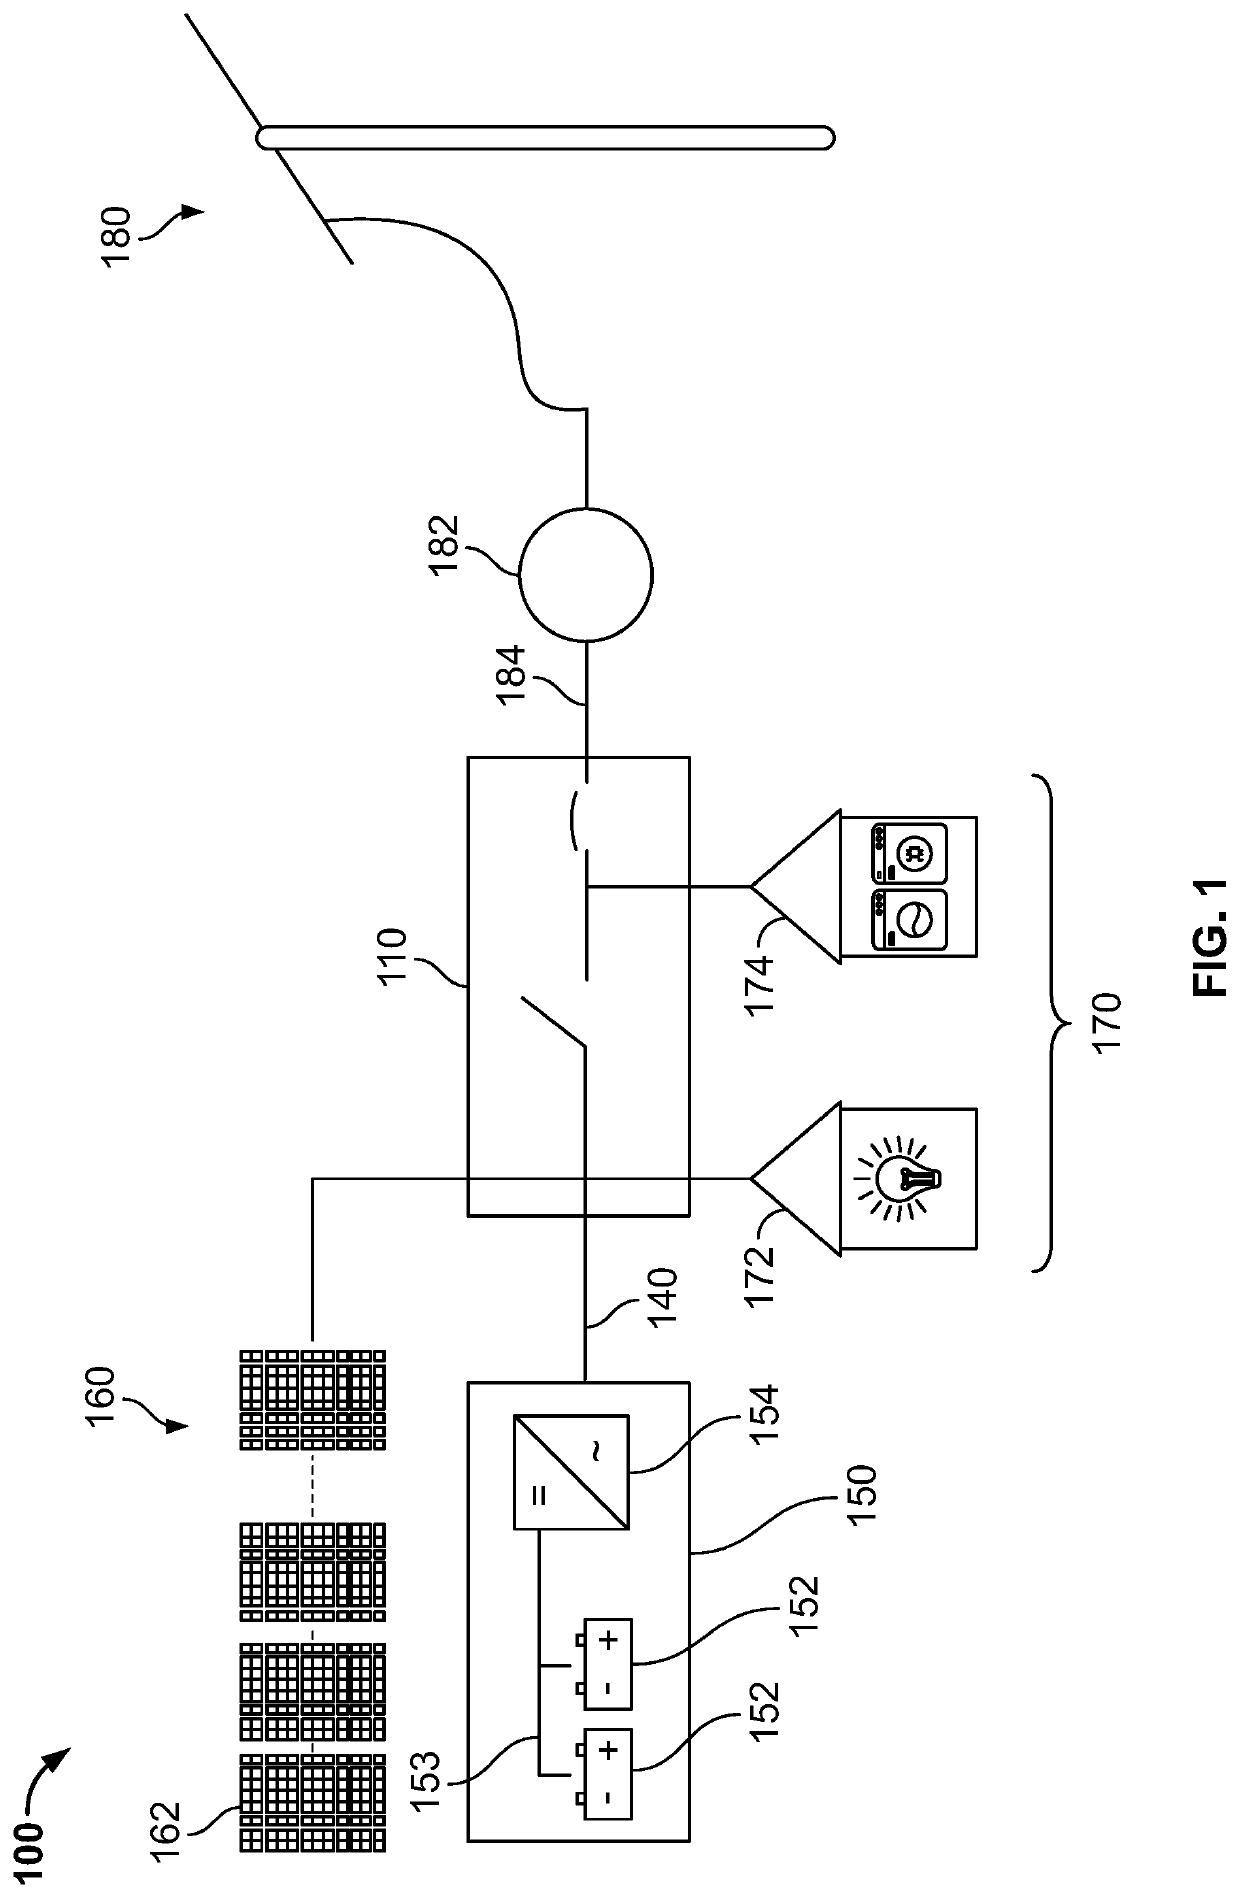 Methods and systems for managing state of charge of an energy storage system during off-grid operation